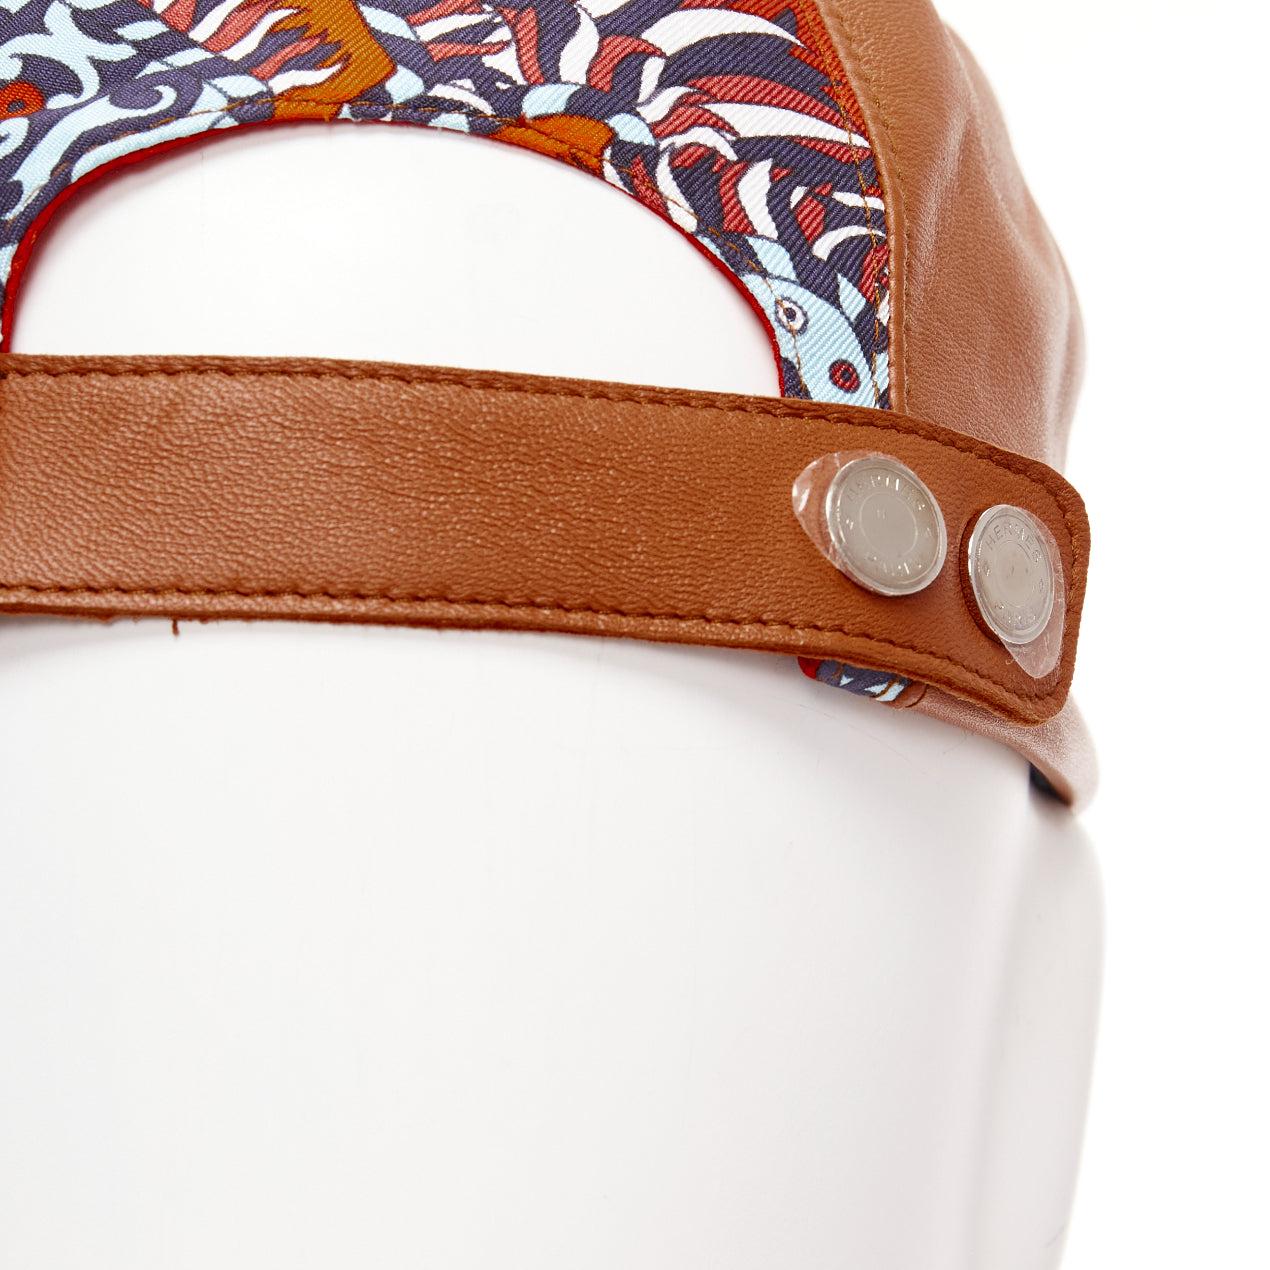 HERMES brown lambskin leather navy orange cotton silk scarf patch cap 57cm
Reference: AAWC/A00928
Brand: Hermes
Material: Lambskin Leather, Cotton, Blend
Color: Brown, Navy
Pattern: Geometric
Closure: Snap Buttons
Lining: Orange Fabric
Extra